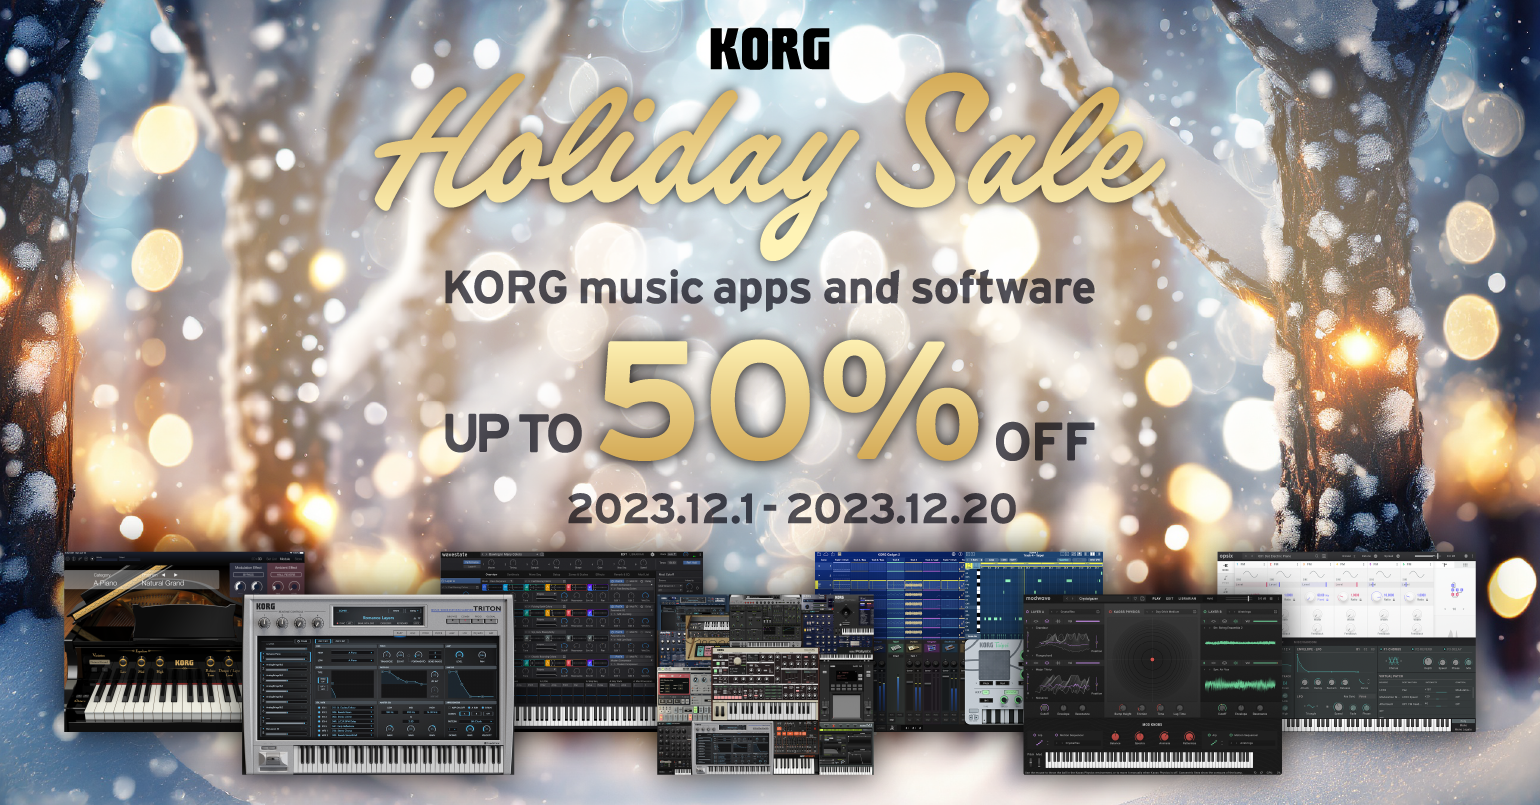 News | Holiday Sale: KORG music apps & software - Up To 50% OFF